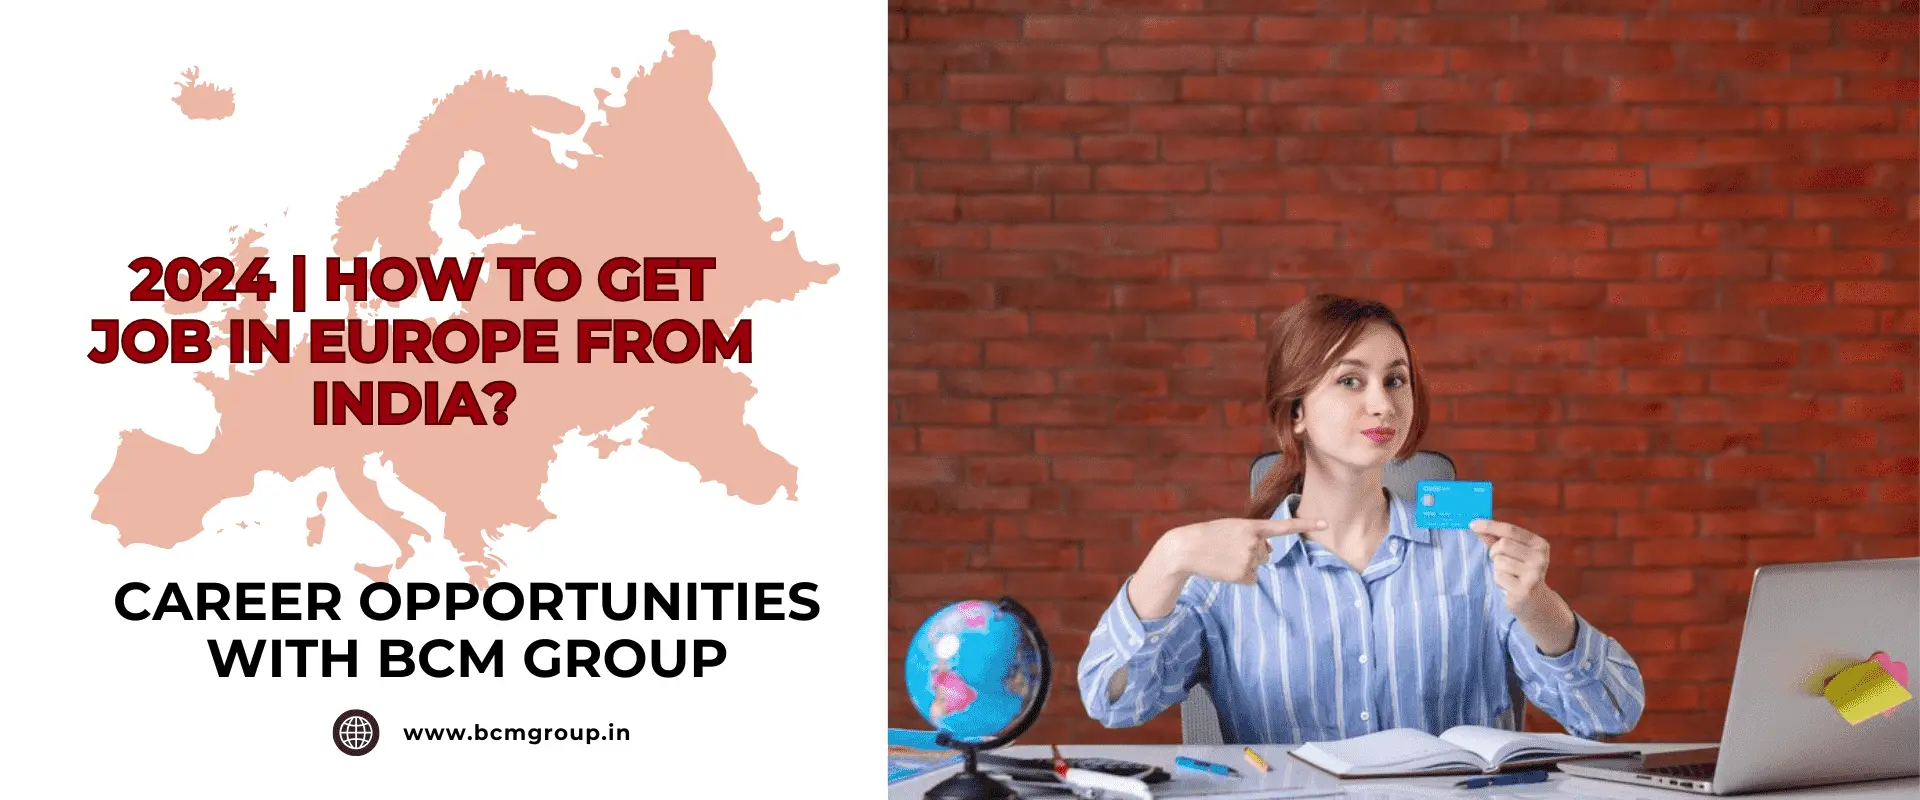 How To Get Job In Europe From India?